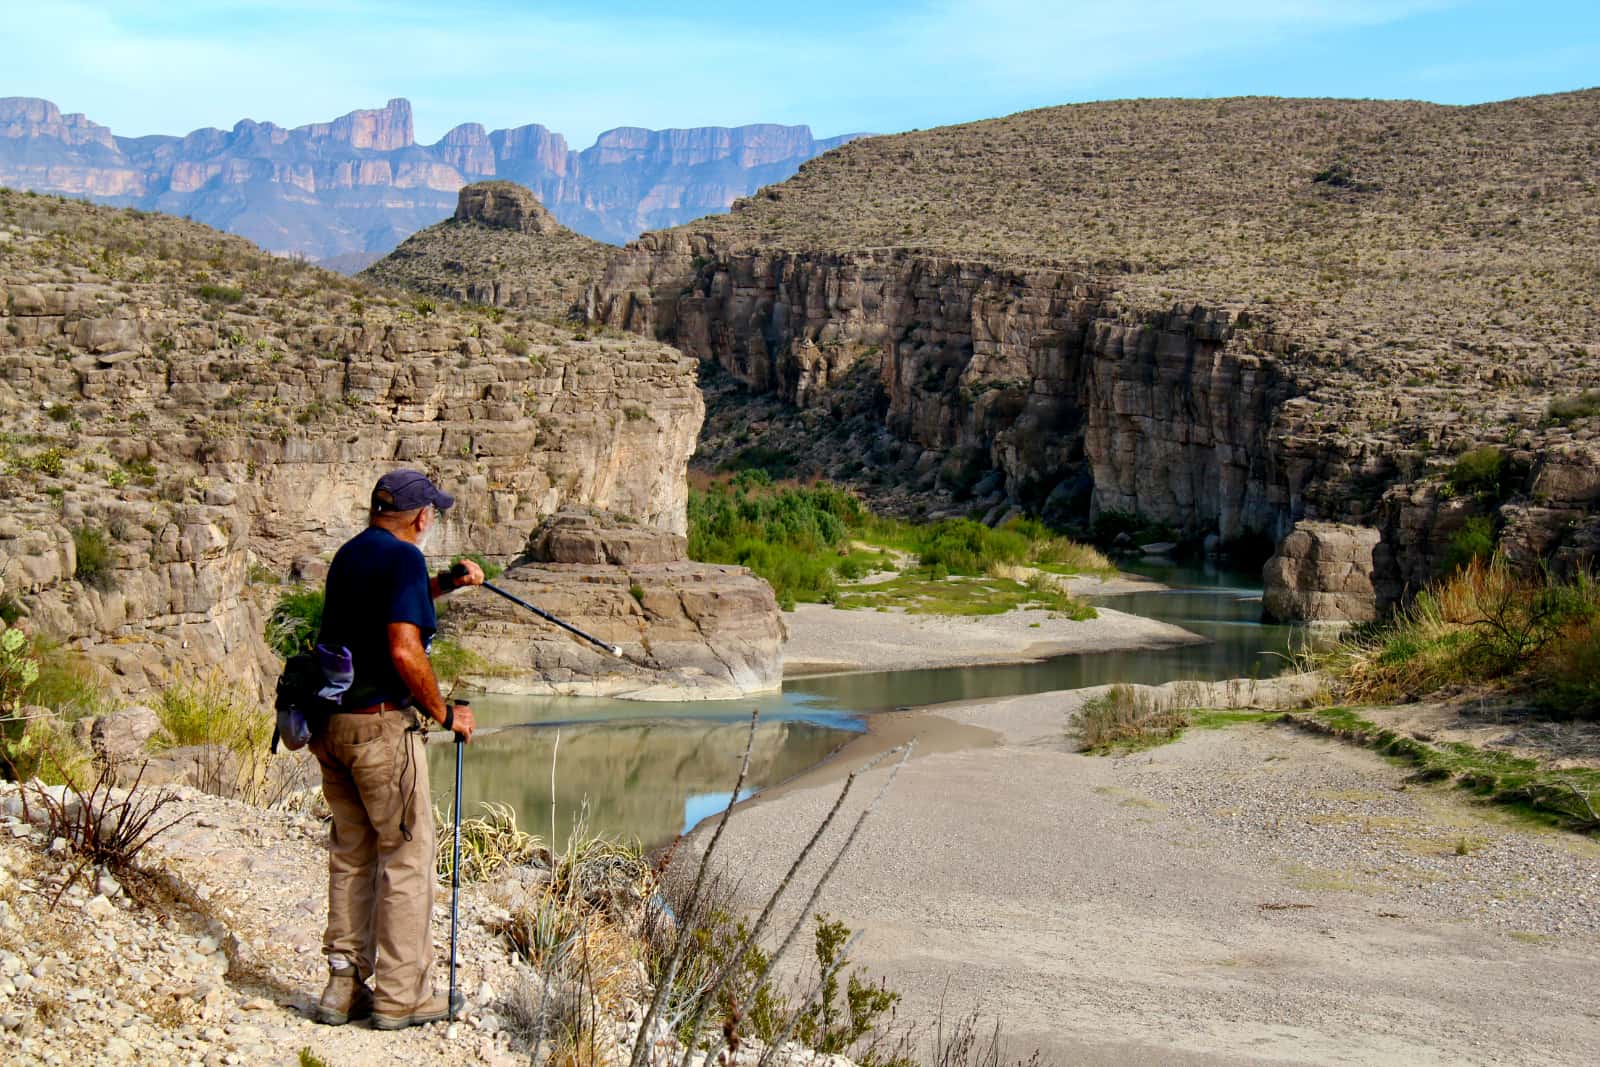 Man in blue shirt pointing pole toward river in canyon